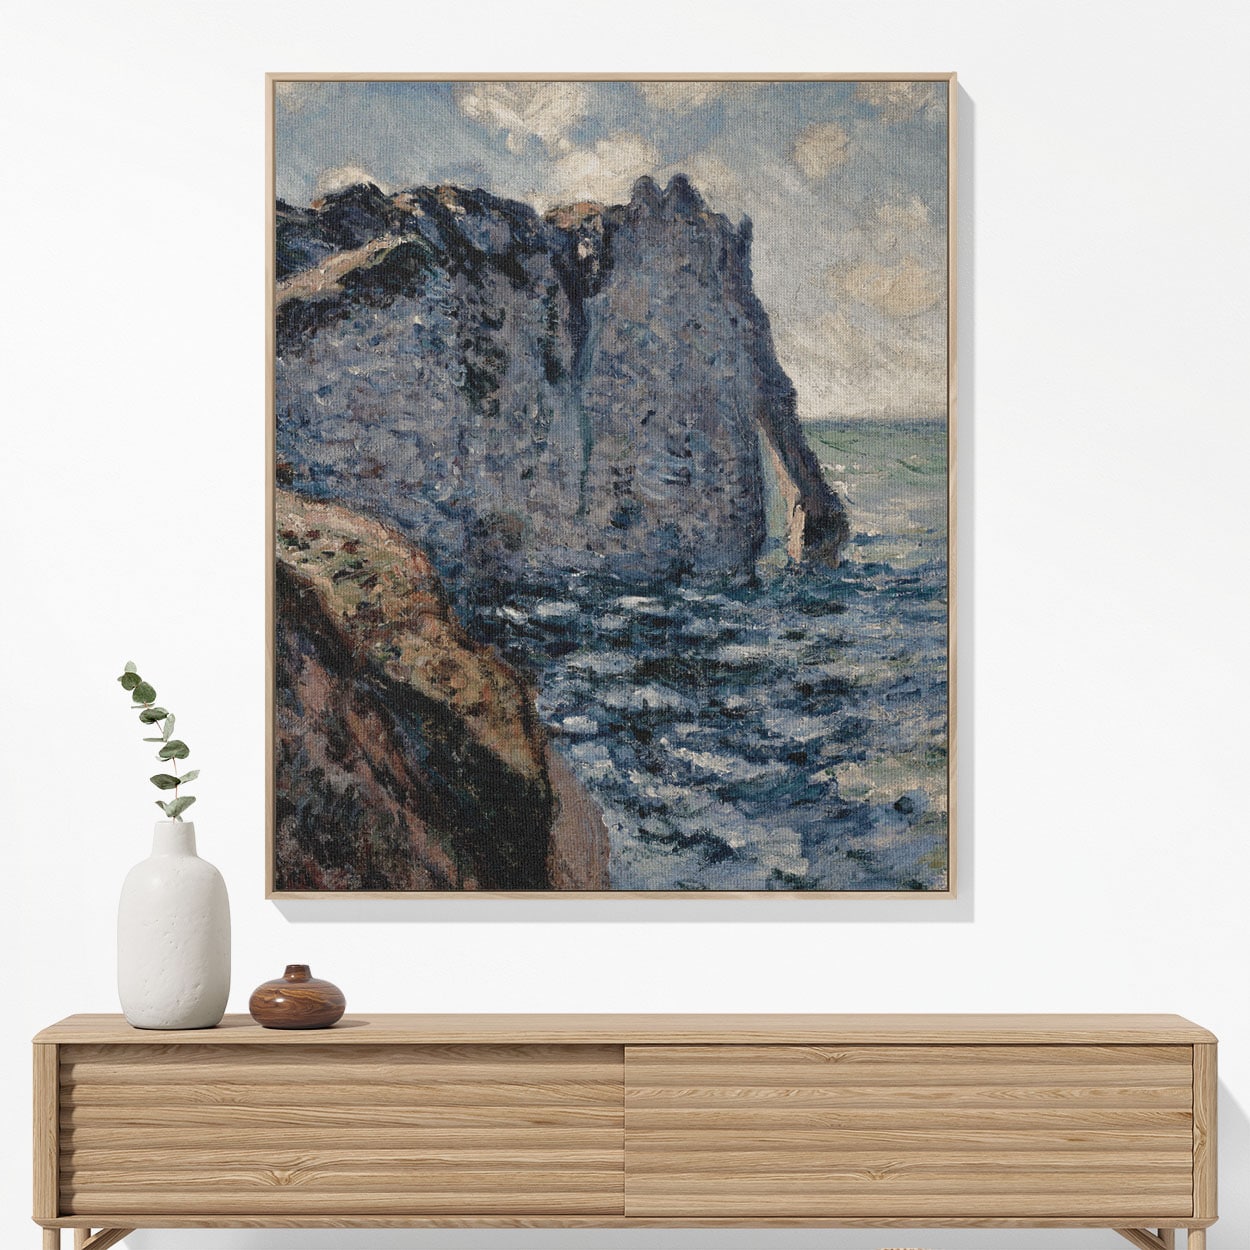 Beach Woven Blanket Woven Blanket Hanging on a Wall as Framed Wall Art